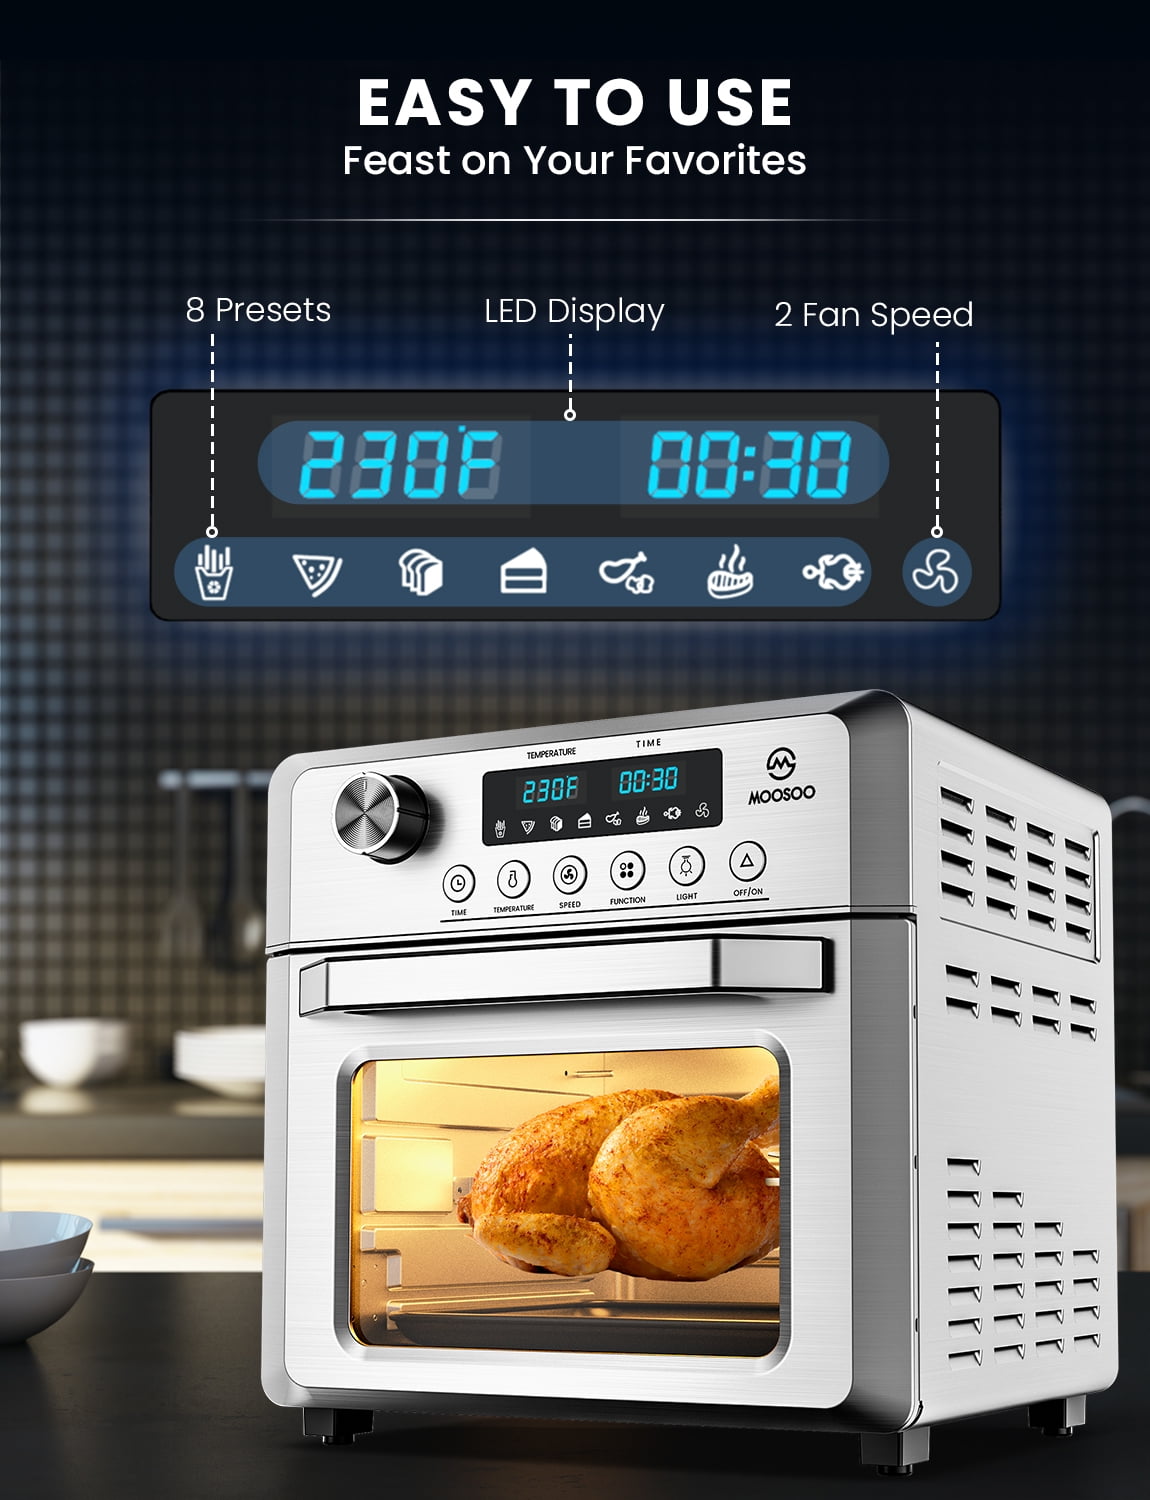 Moosoo Electric Air Fryer Oven Rotisserie 4.7 Qt For Fish/pizza